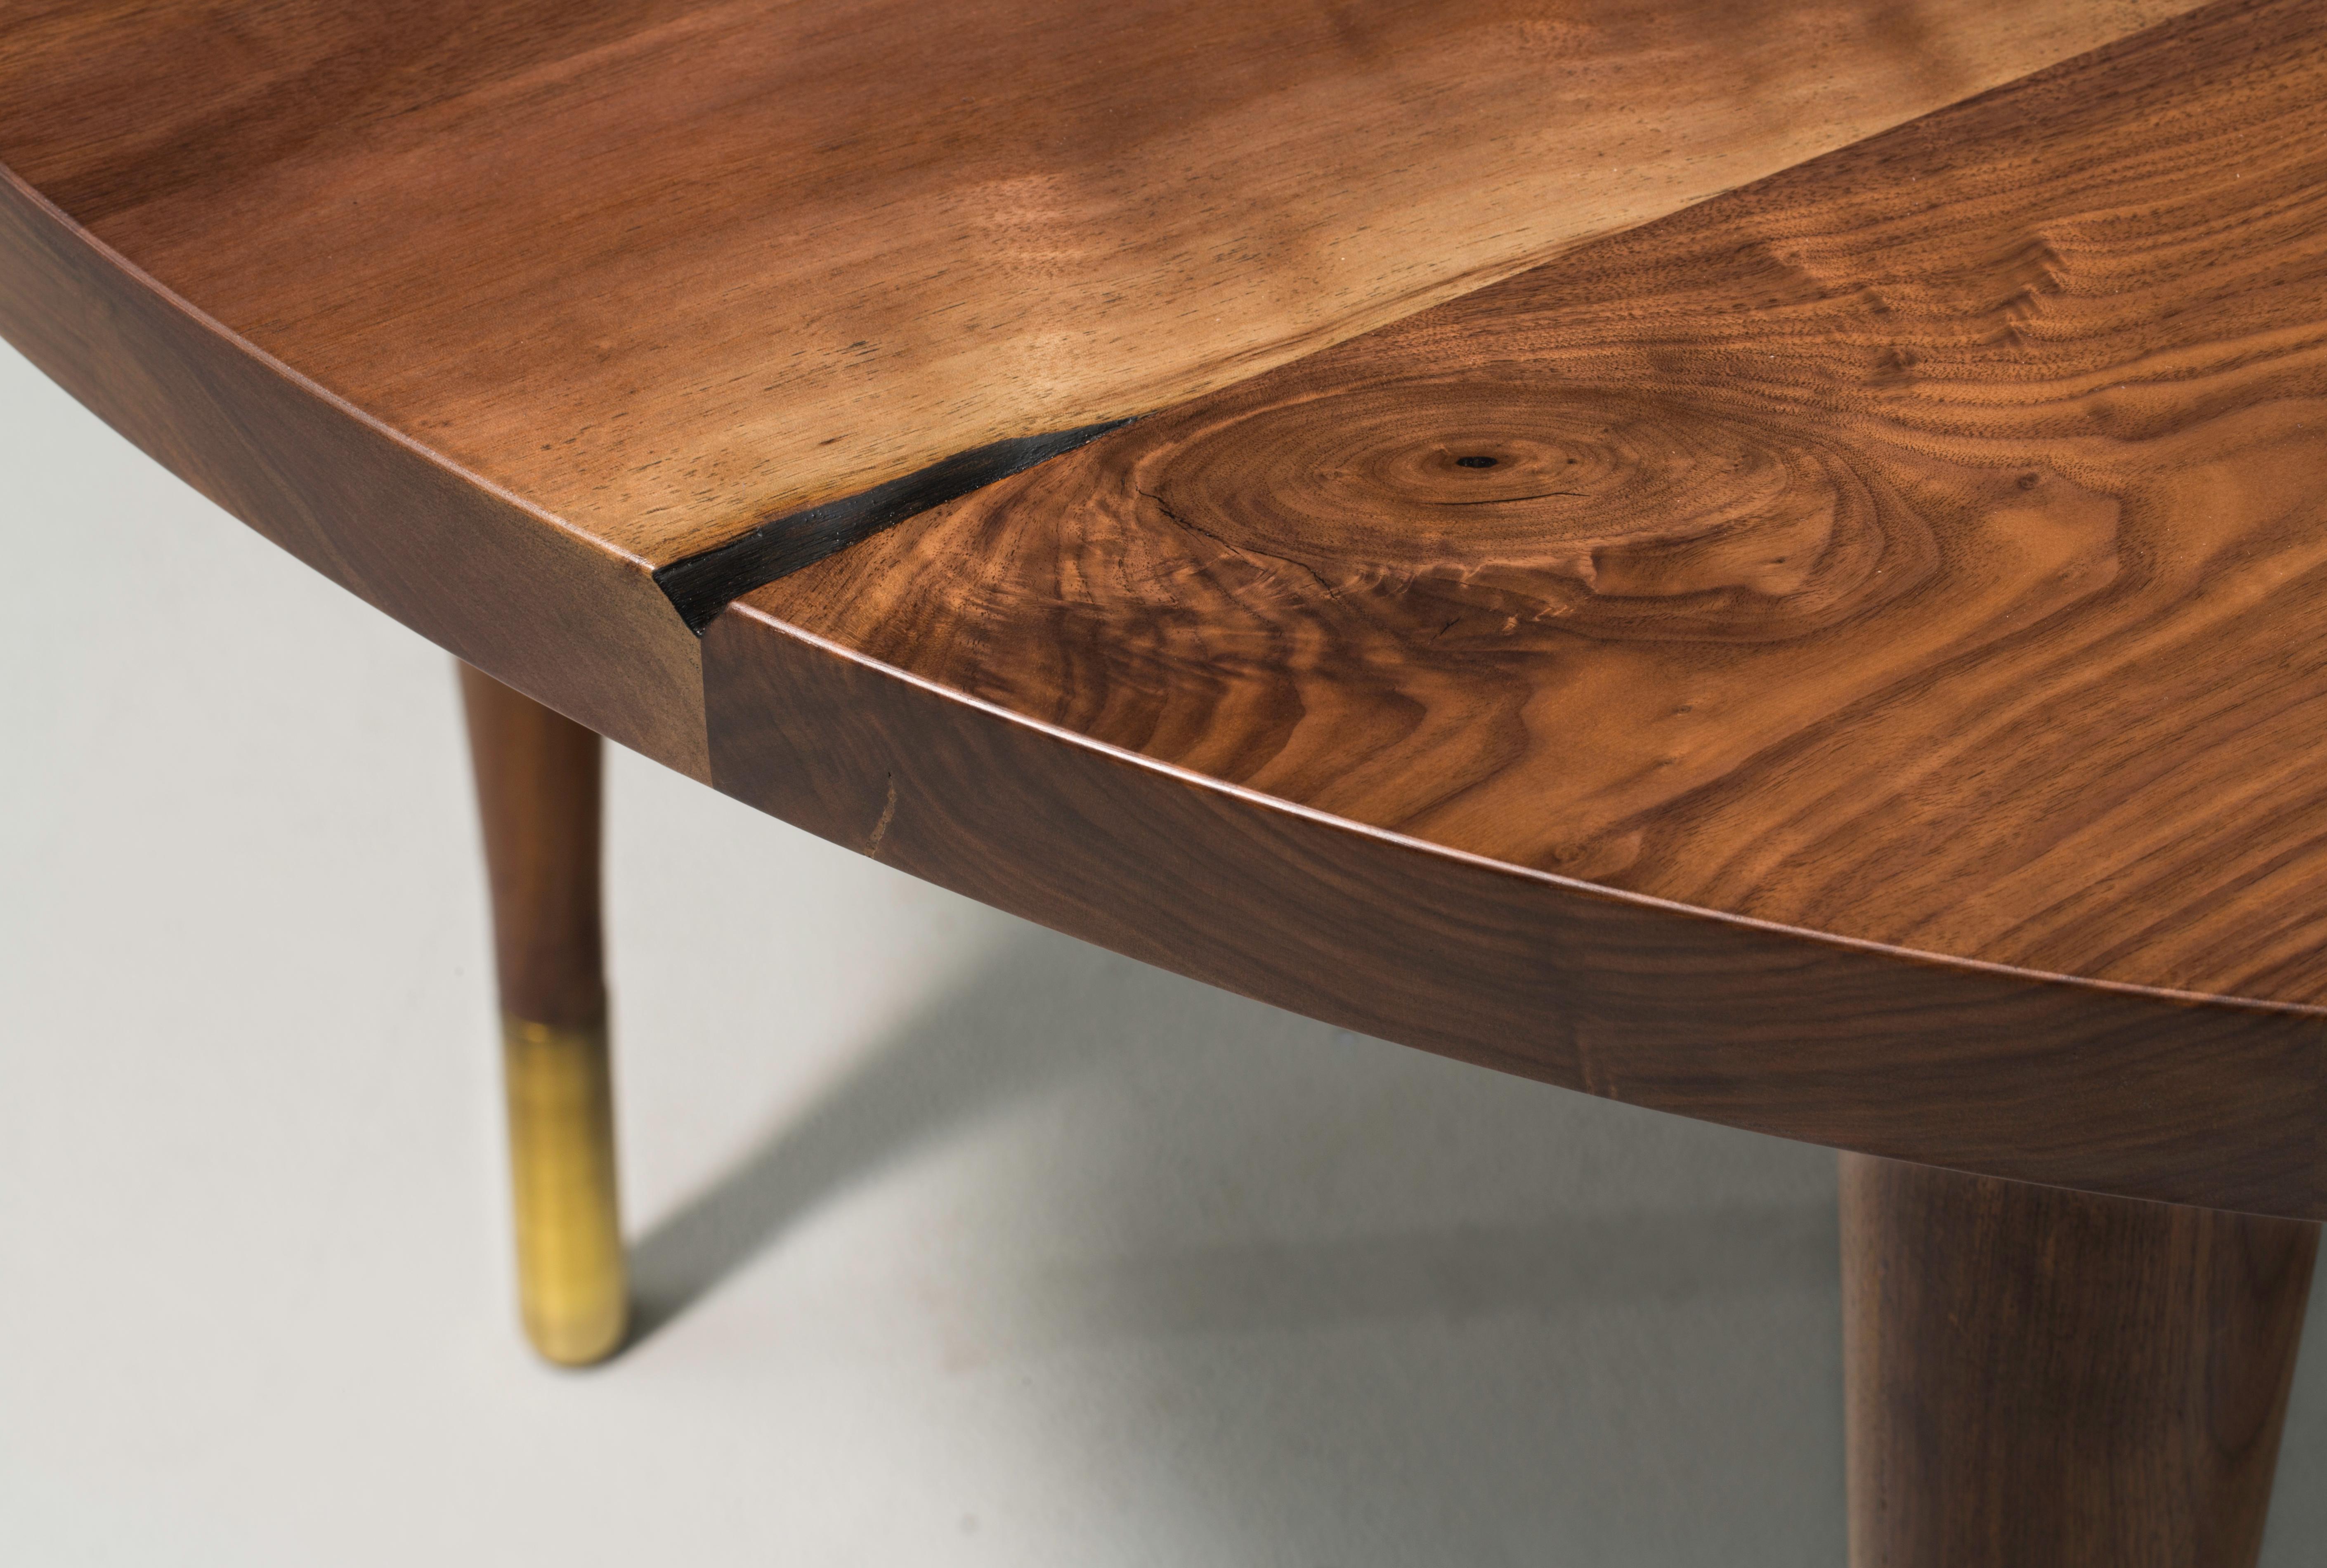 The Warren dining table is an expanding circular dining table made of solid walnut boards. The simple and sleek tapered legs are capped in brass to add elegance and style to the table. With added leaves to the table, it has the versatility to fit